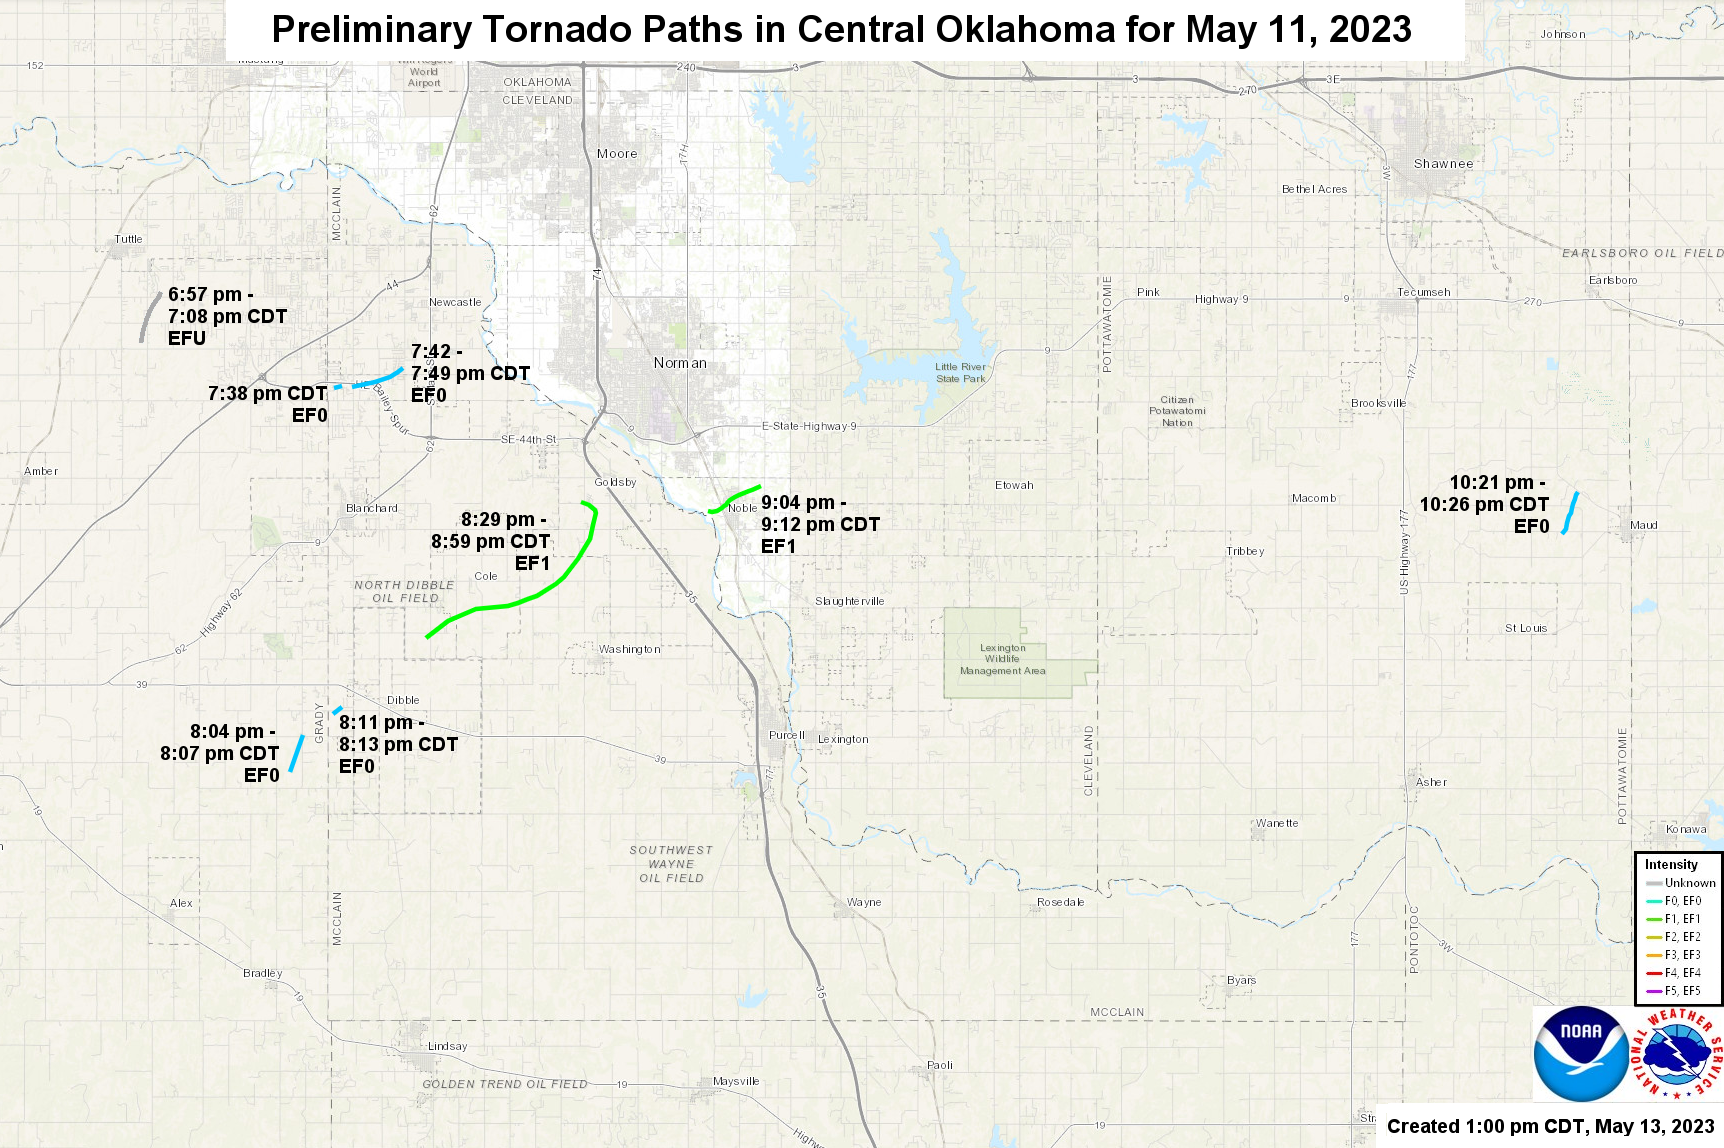 Preliminary Tornado Path Map for the May 11, 2023 Tornadoes